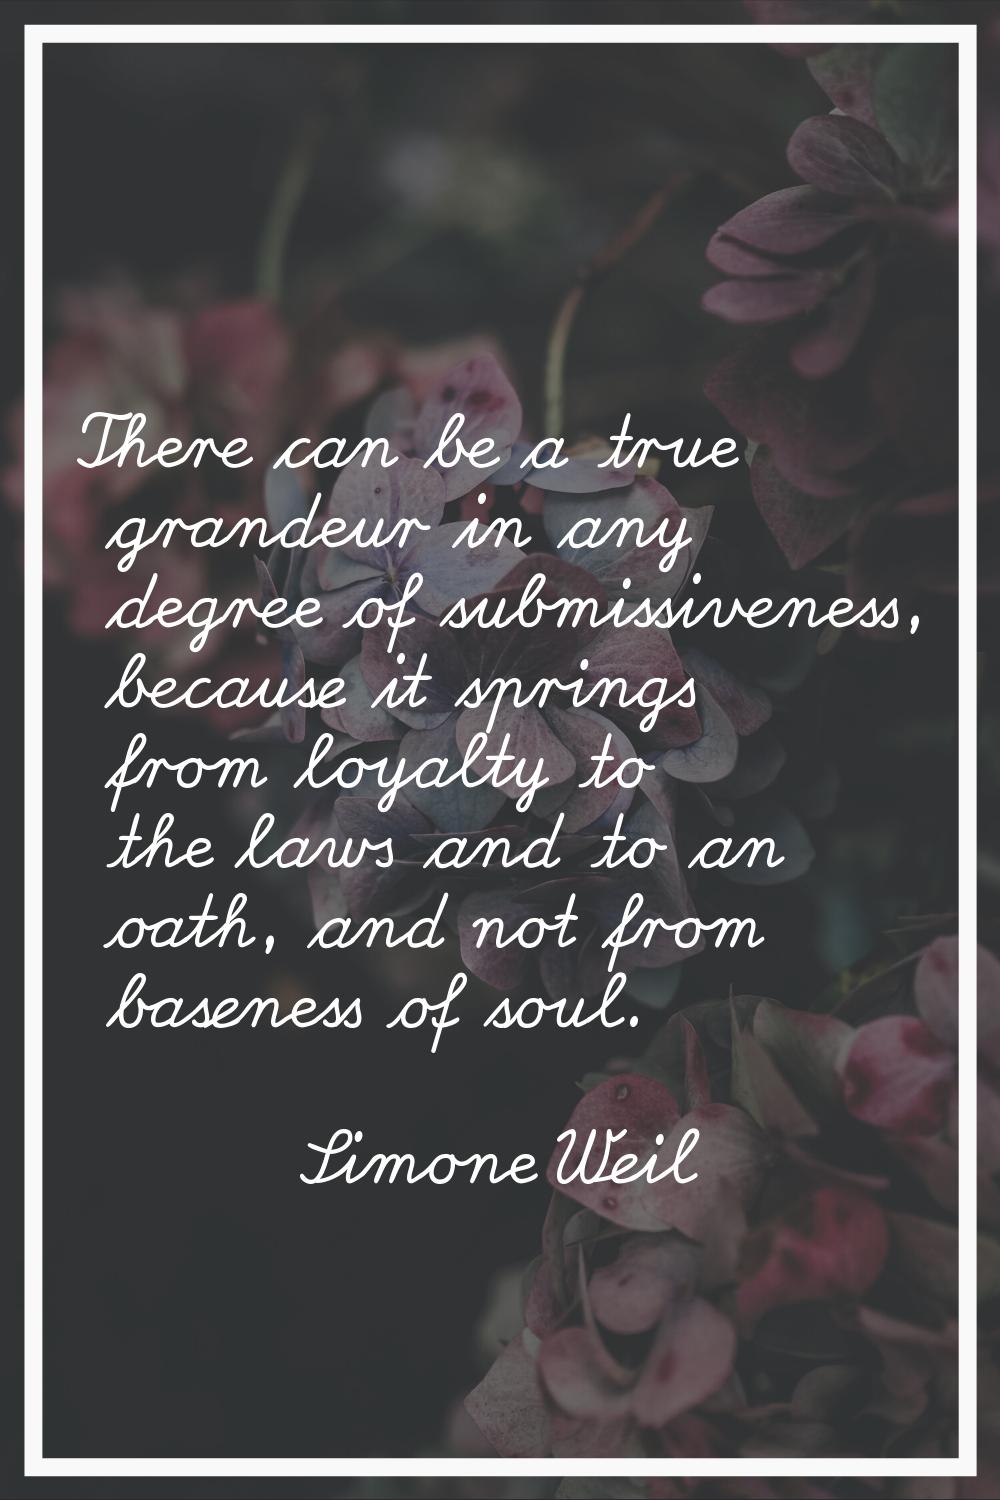 There can be a true grandeur in any degree of submissiveness, because it springs from loyalty to th